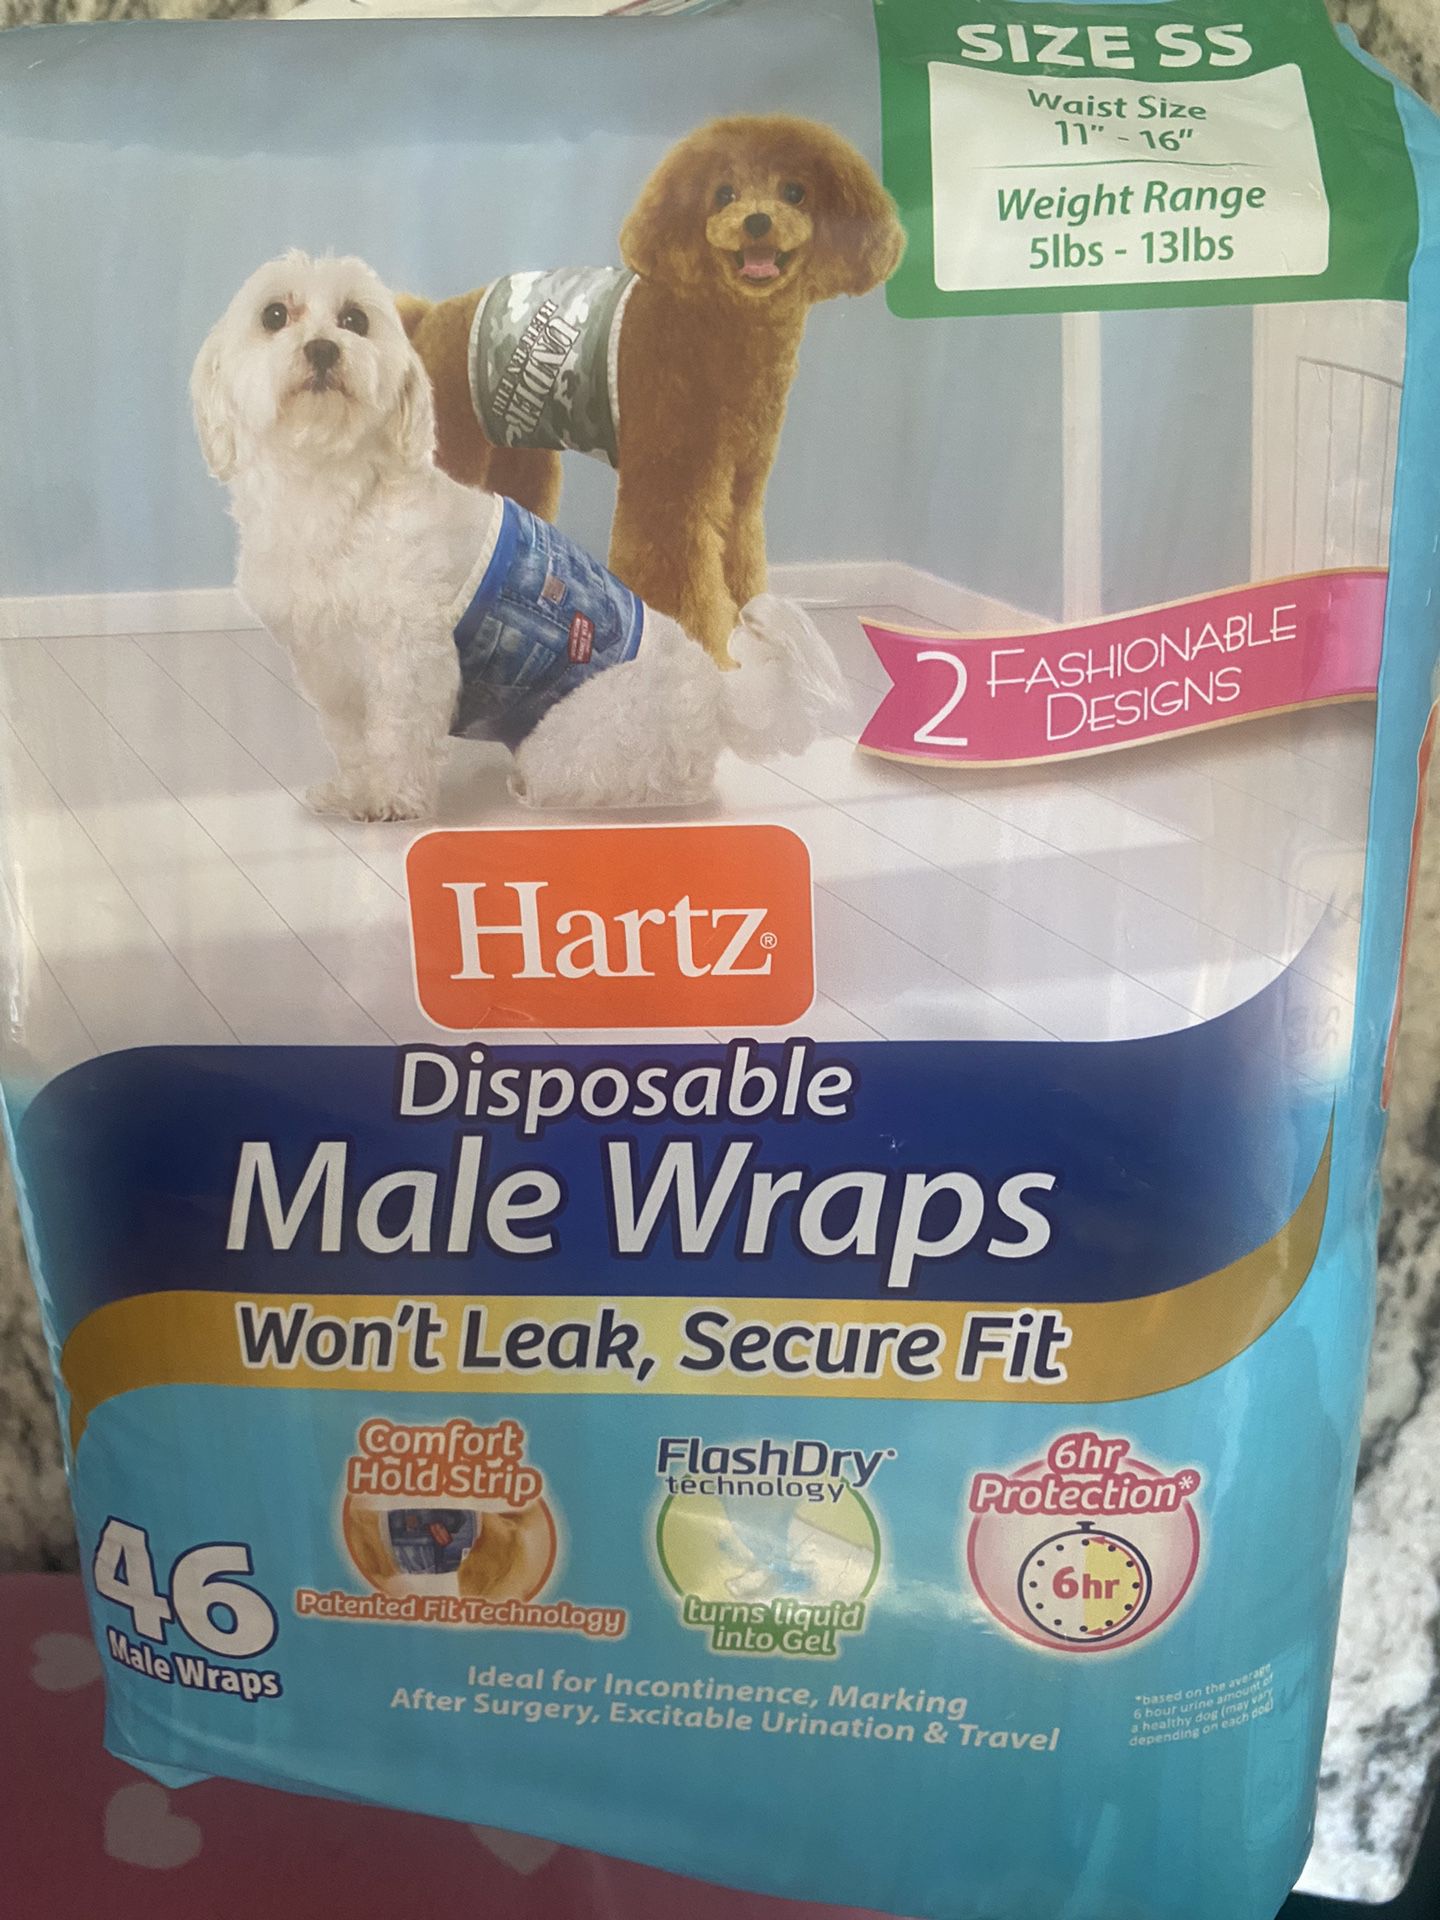 Hartz Disposable Male Wraps/Diapers for dogs, Size 5-13lbs (waist size 11”-16”).  46 Count.  